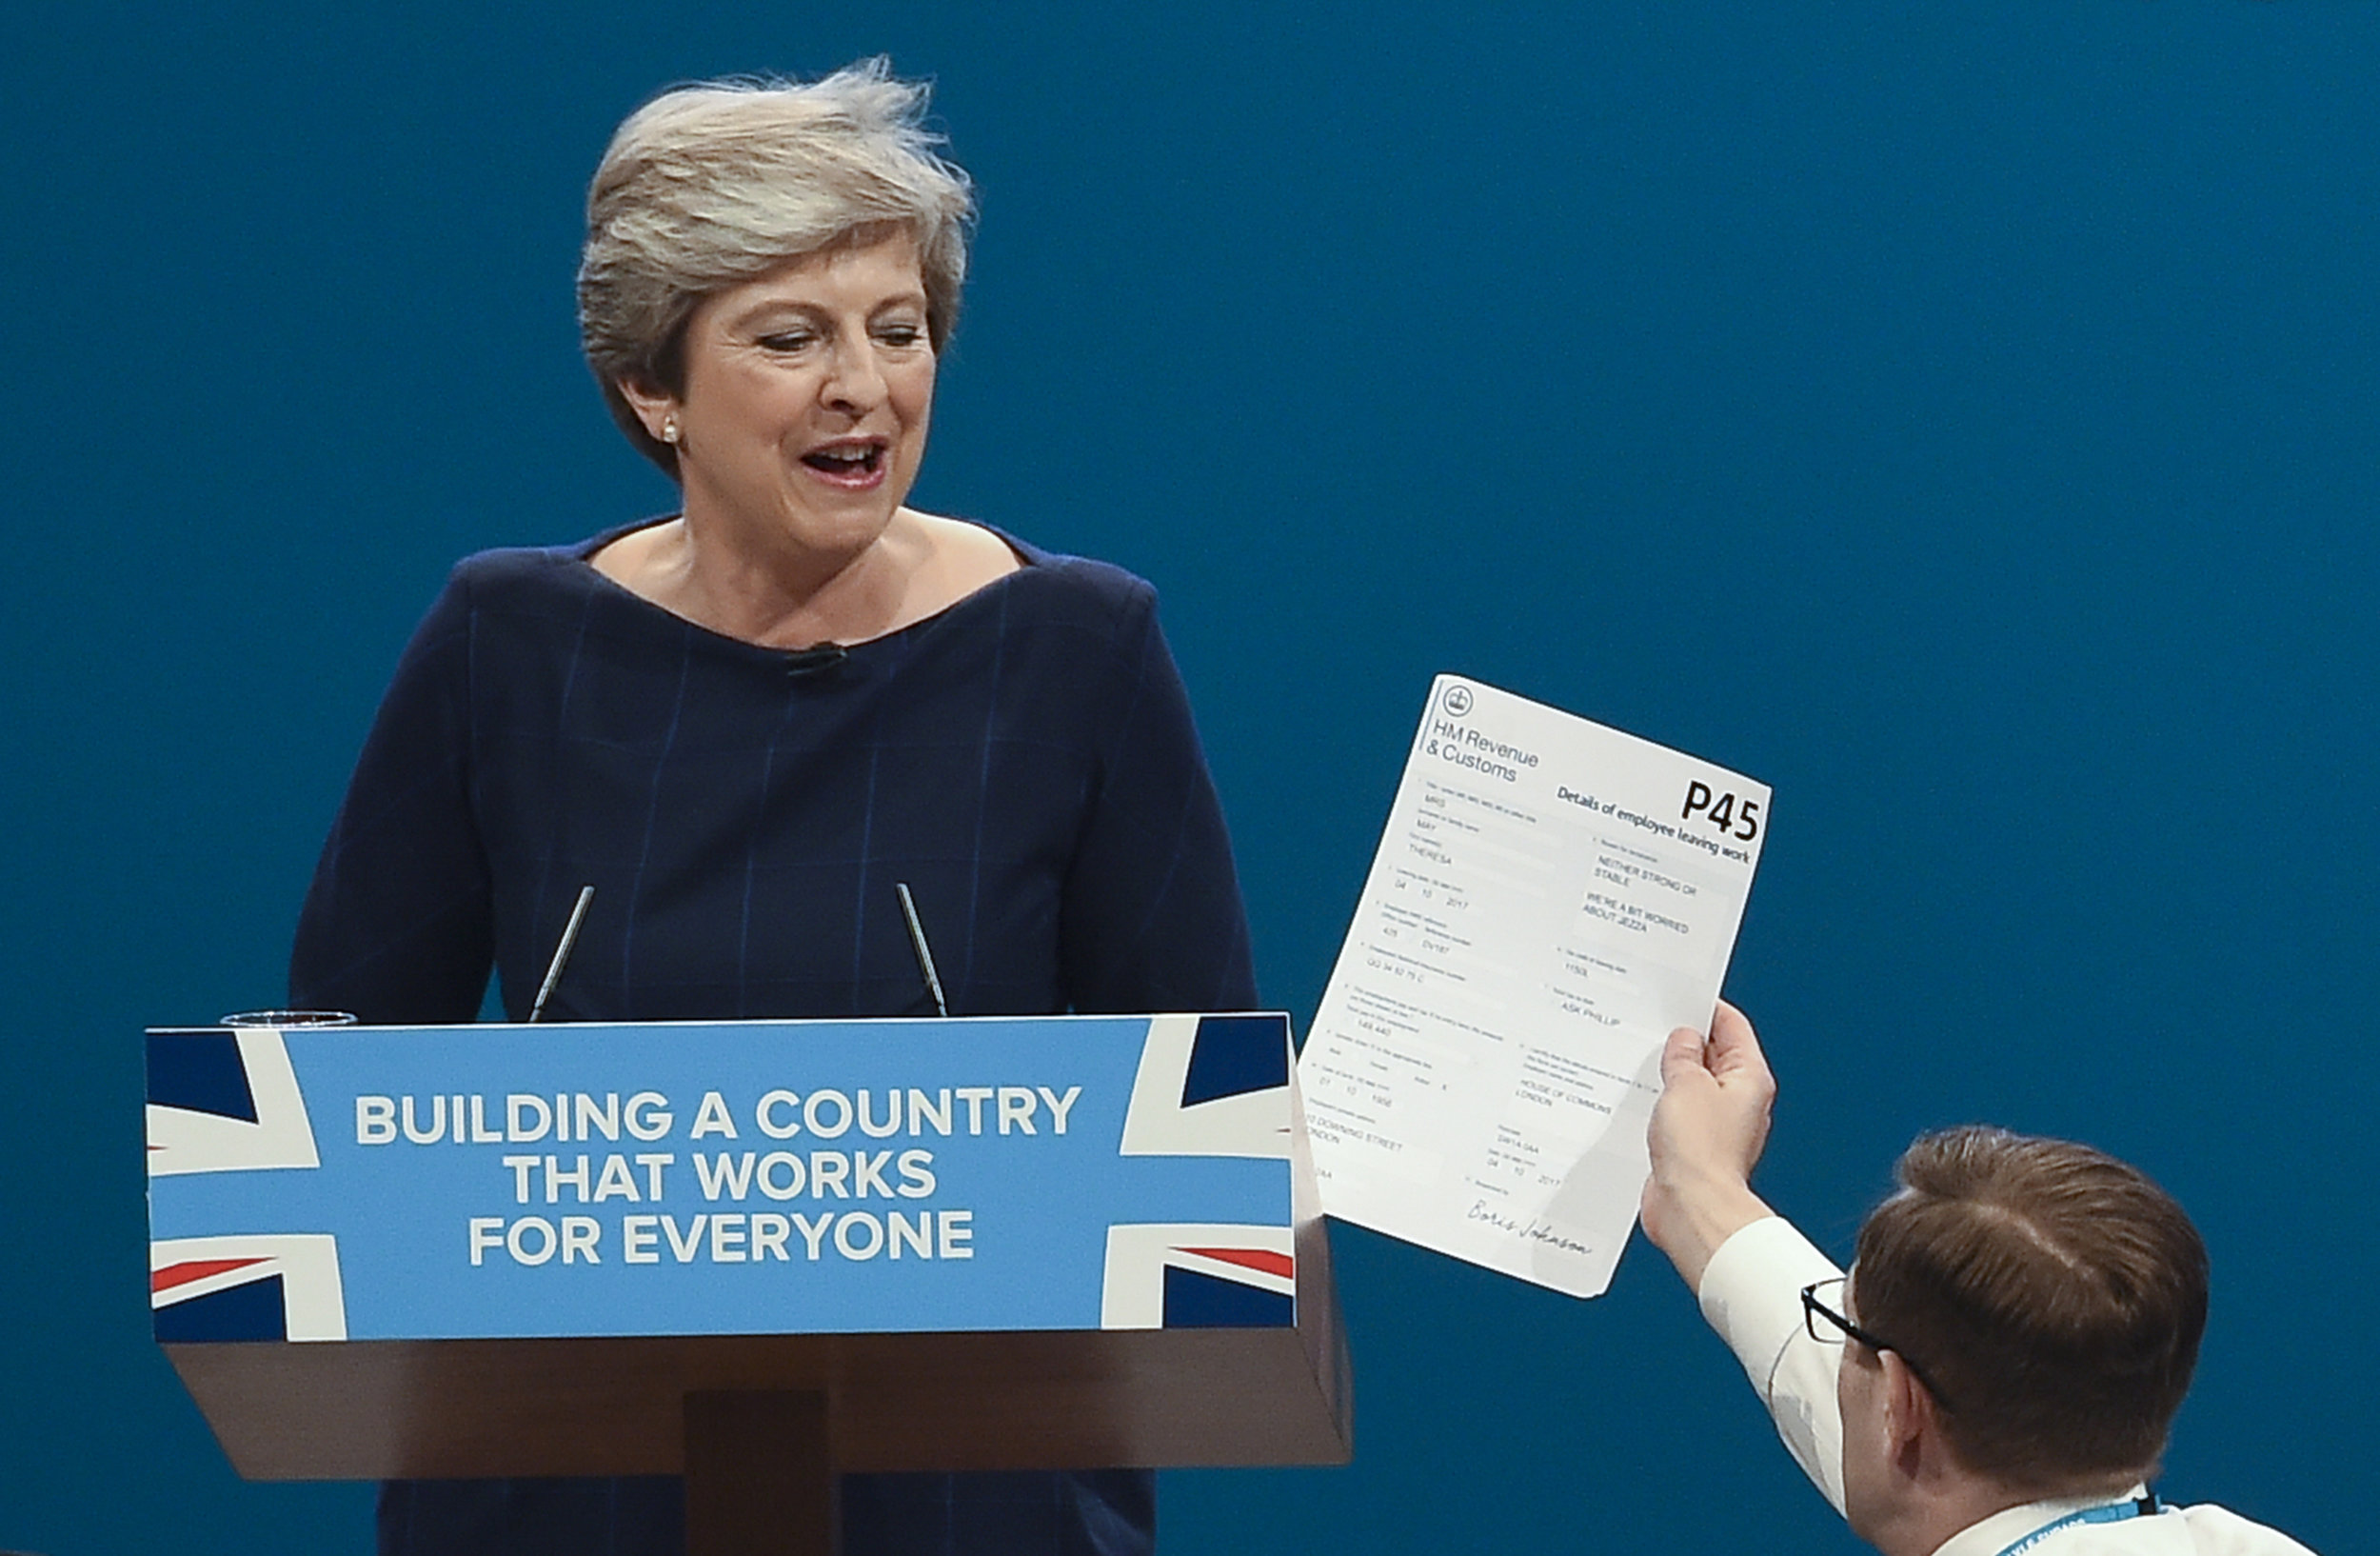  Protester and comedian Simon Brodkin gives a mock P45 to Prime Minister Theresa May MP (L) as she deivers her speech on the final day of the Conservative Party Conference in Manchester.
Photo by Paul Ellis, 04 October 2017
 